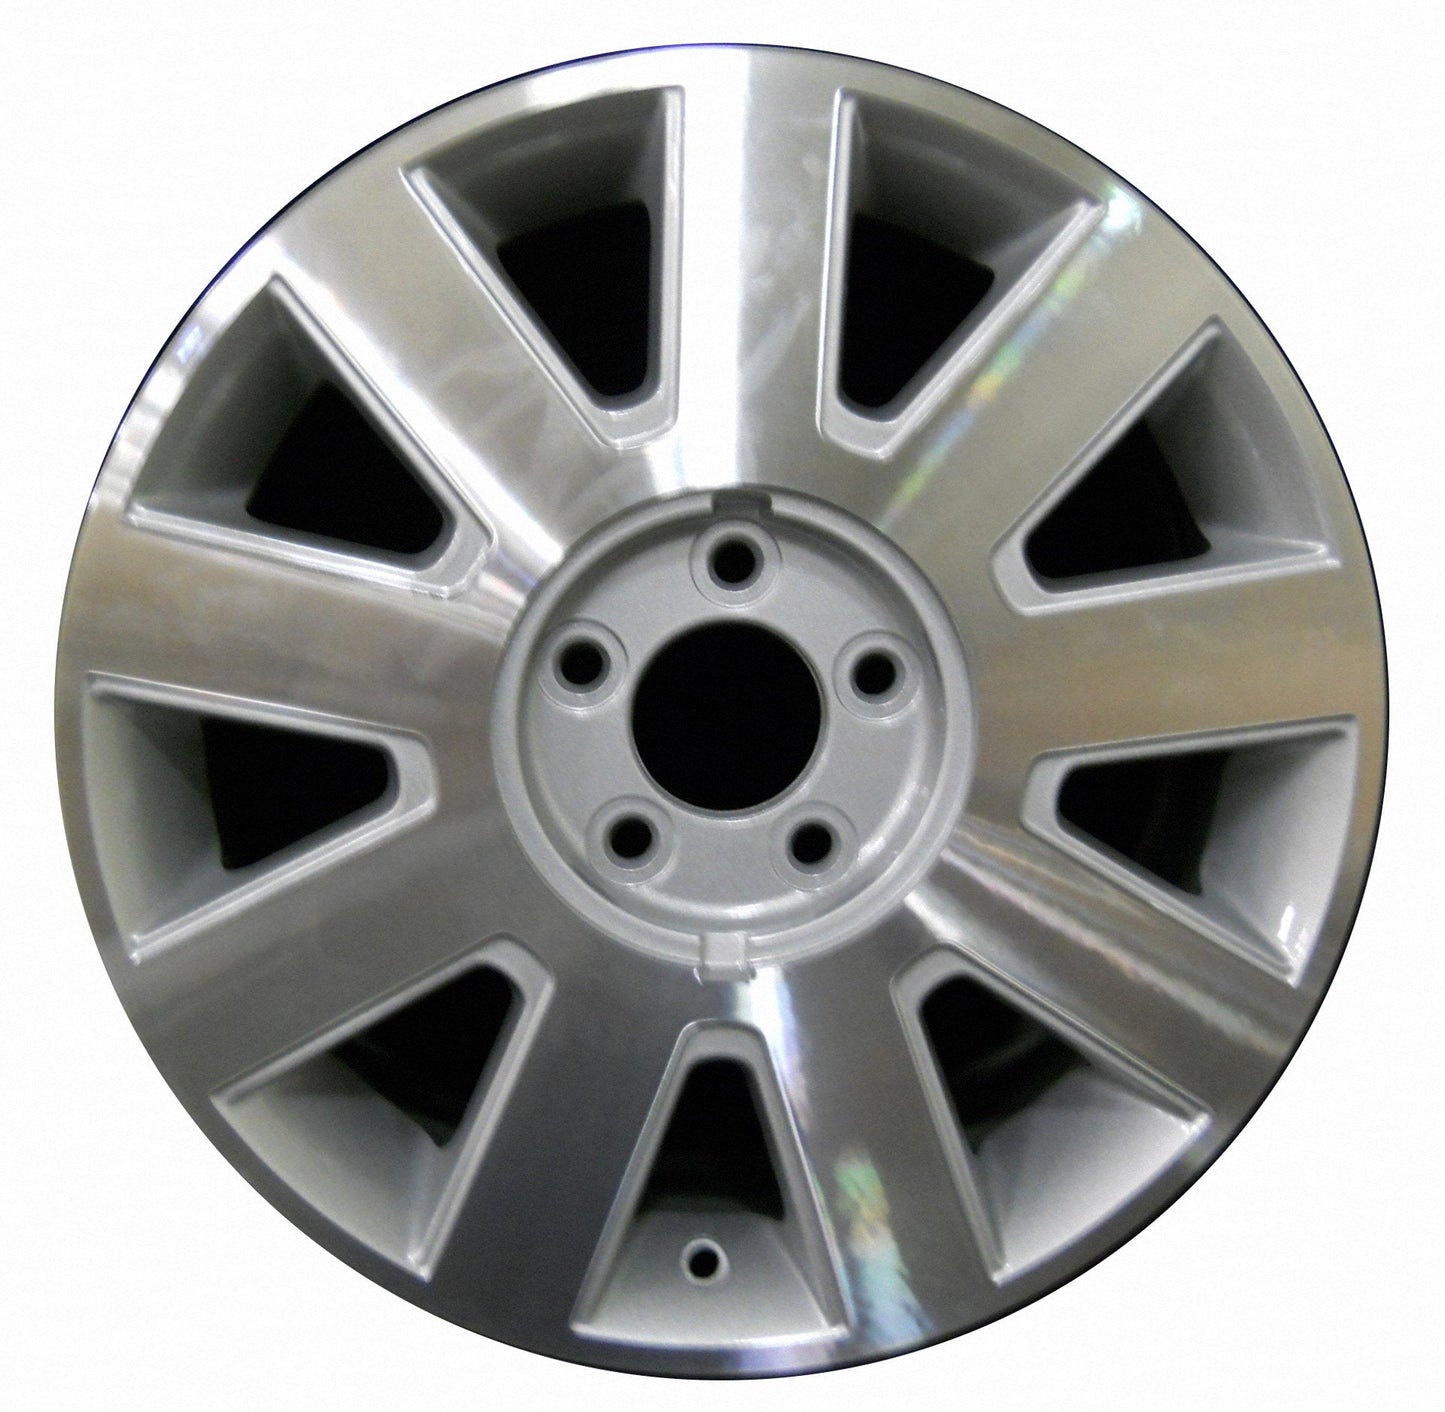 Lincoln Town Car  2003, 2004, 2005, 2006, 2007, 2008, 2009, 2010, 2011 Factory OEM Car Wheel Size 17x7 Alloy WAO.3501.PS02.MA